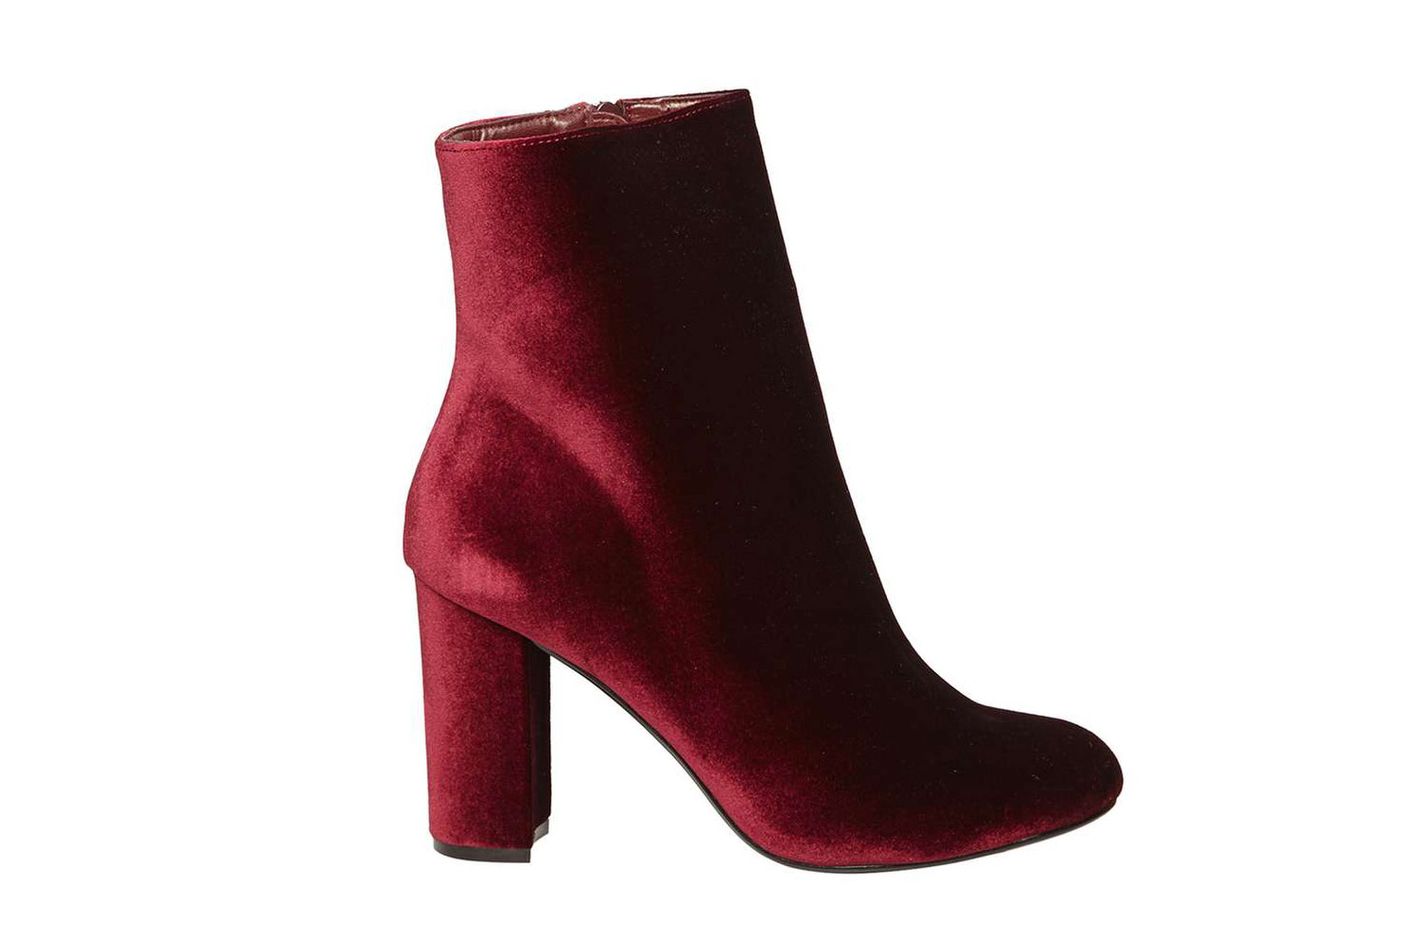 14 Fall Boots Under $300 That Make a Statement